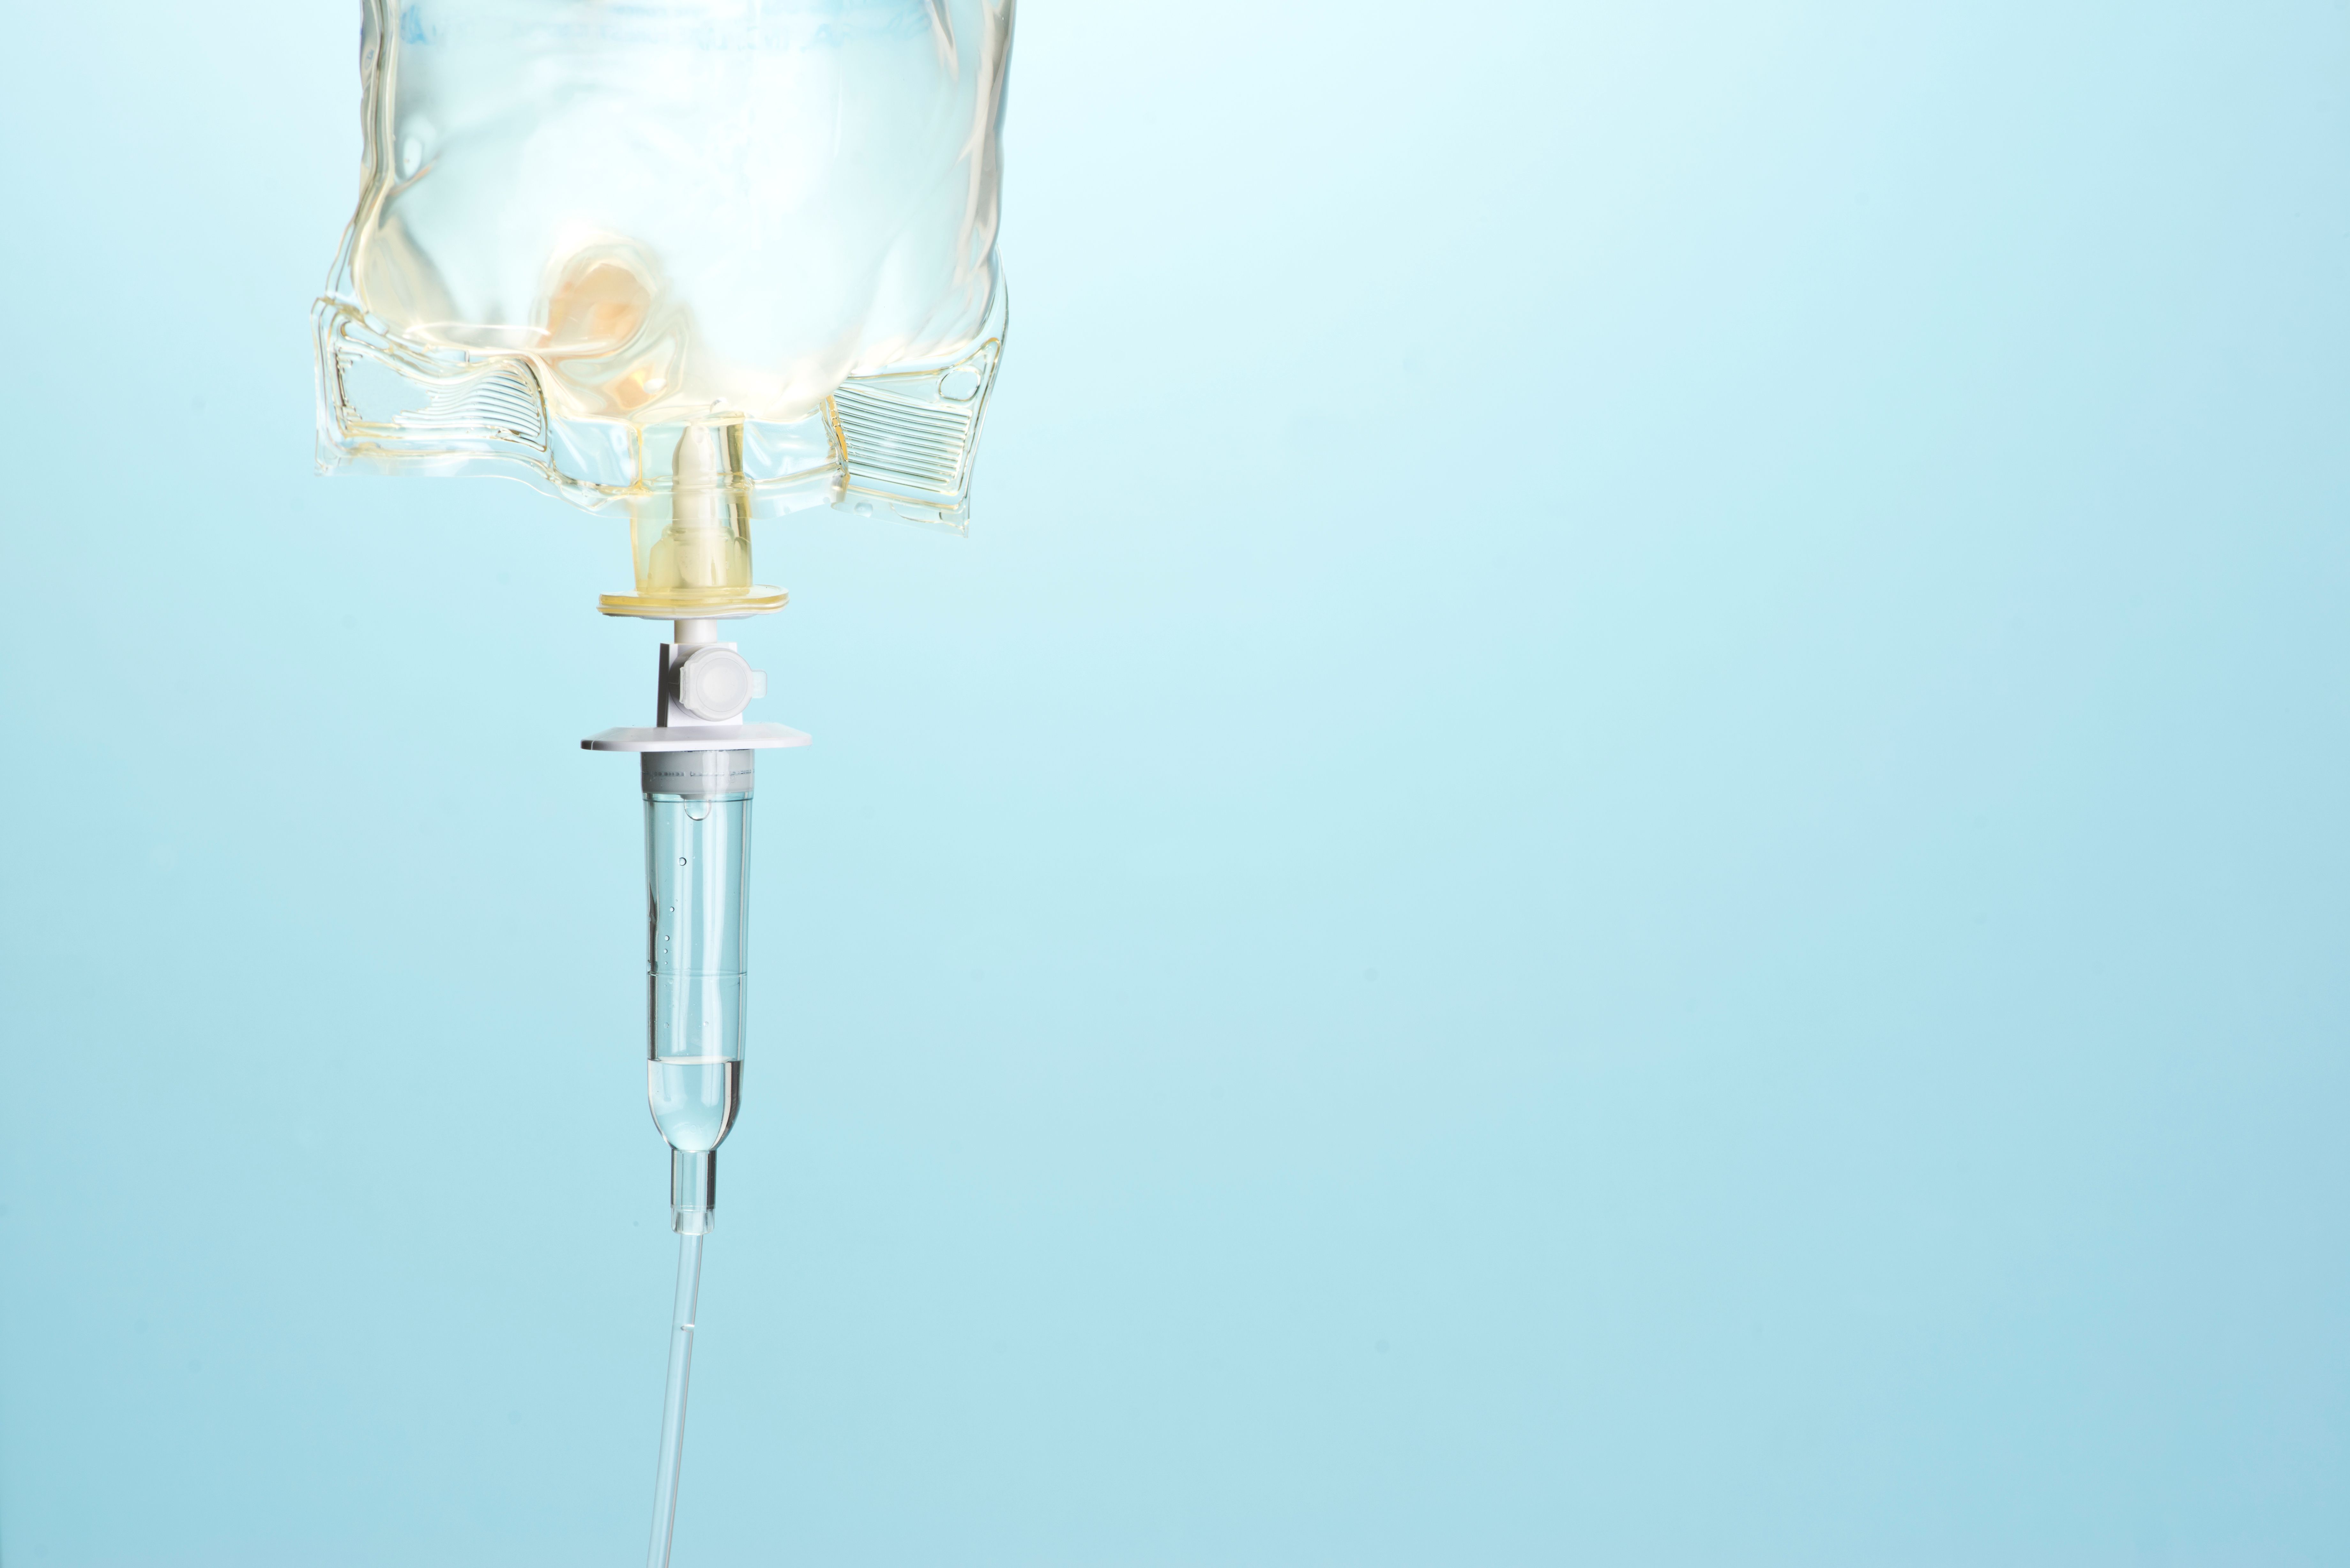 IV Bag Drip Intravenous medication for hospital use | Image Credit: Sherry Young - stock.adobe.com